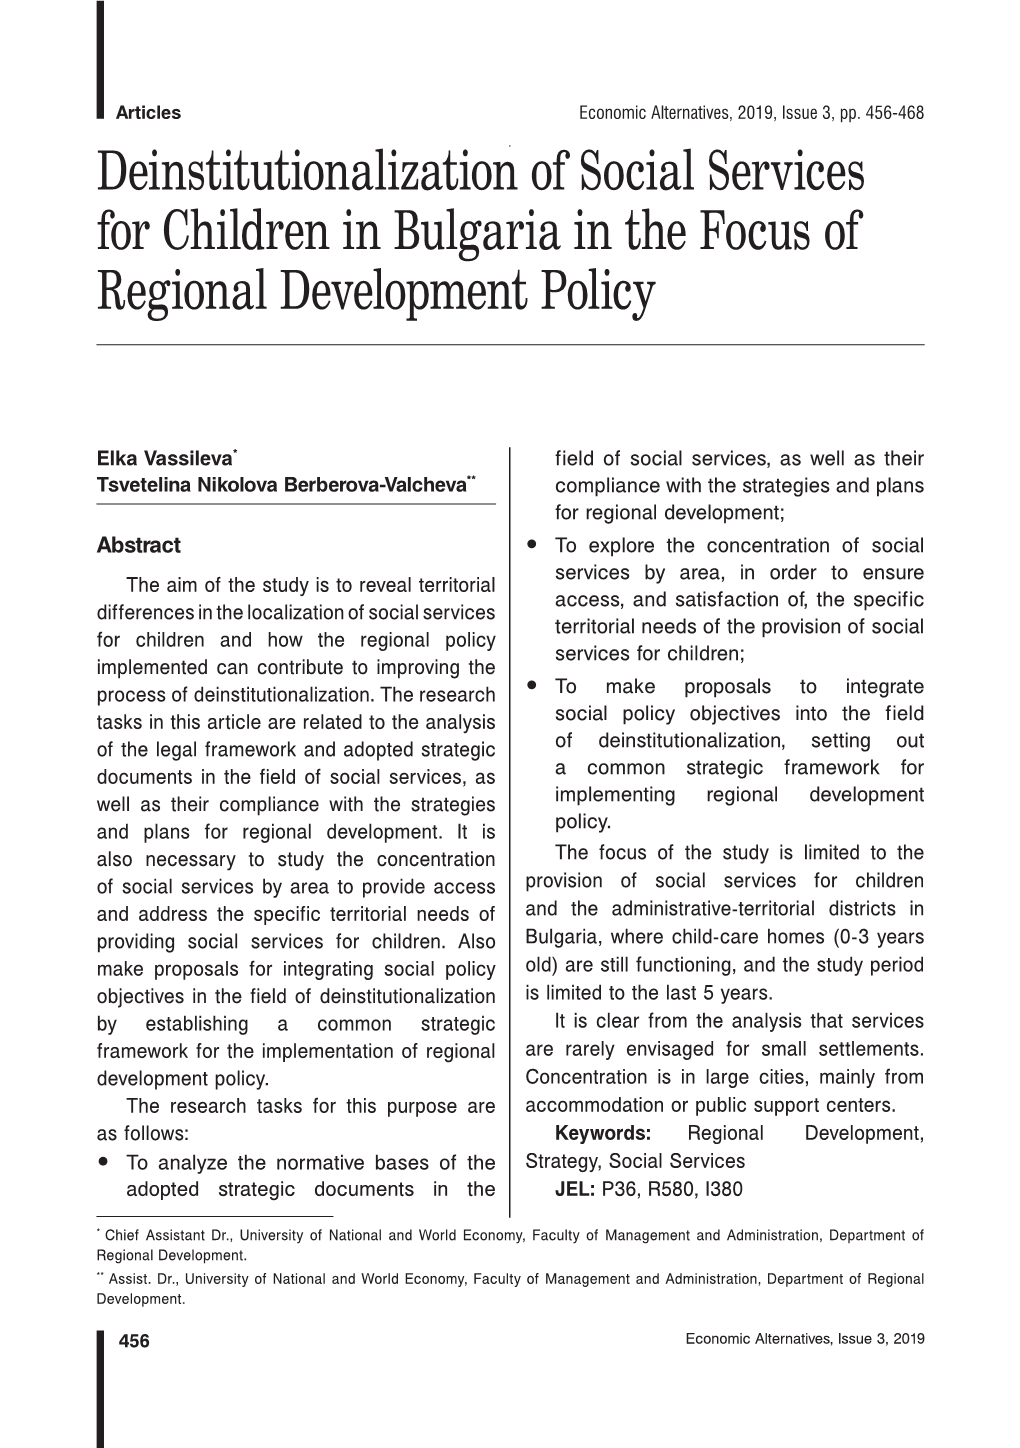 Deinstitutionalization of Social Services for Children in Bulgaria in the Focus of Regional Development Policy